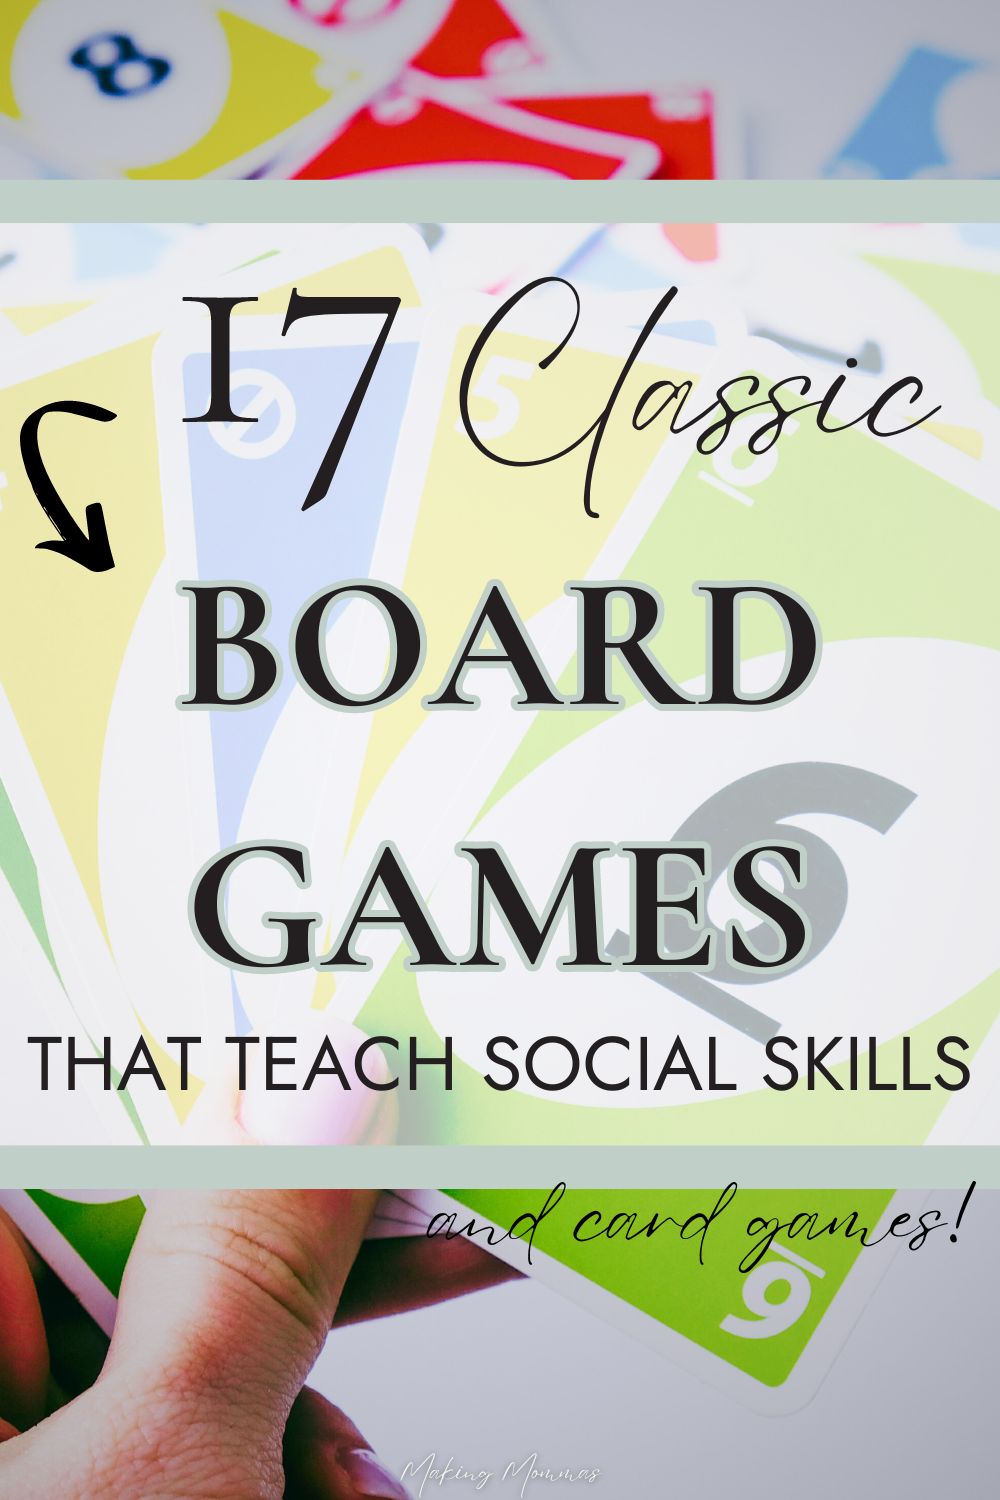 pin image that reads, "17 classic board games that teach social skills and card games!" with an image of someone playing uno in the background.